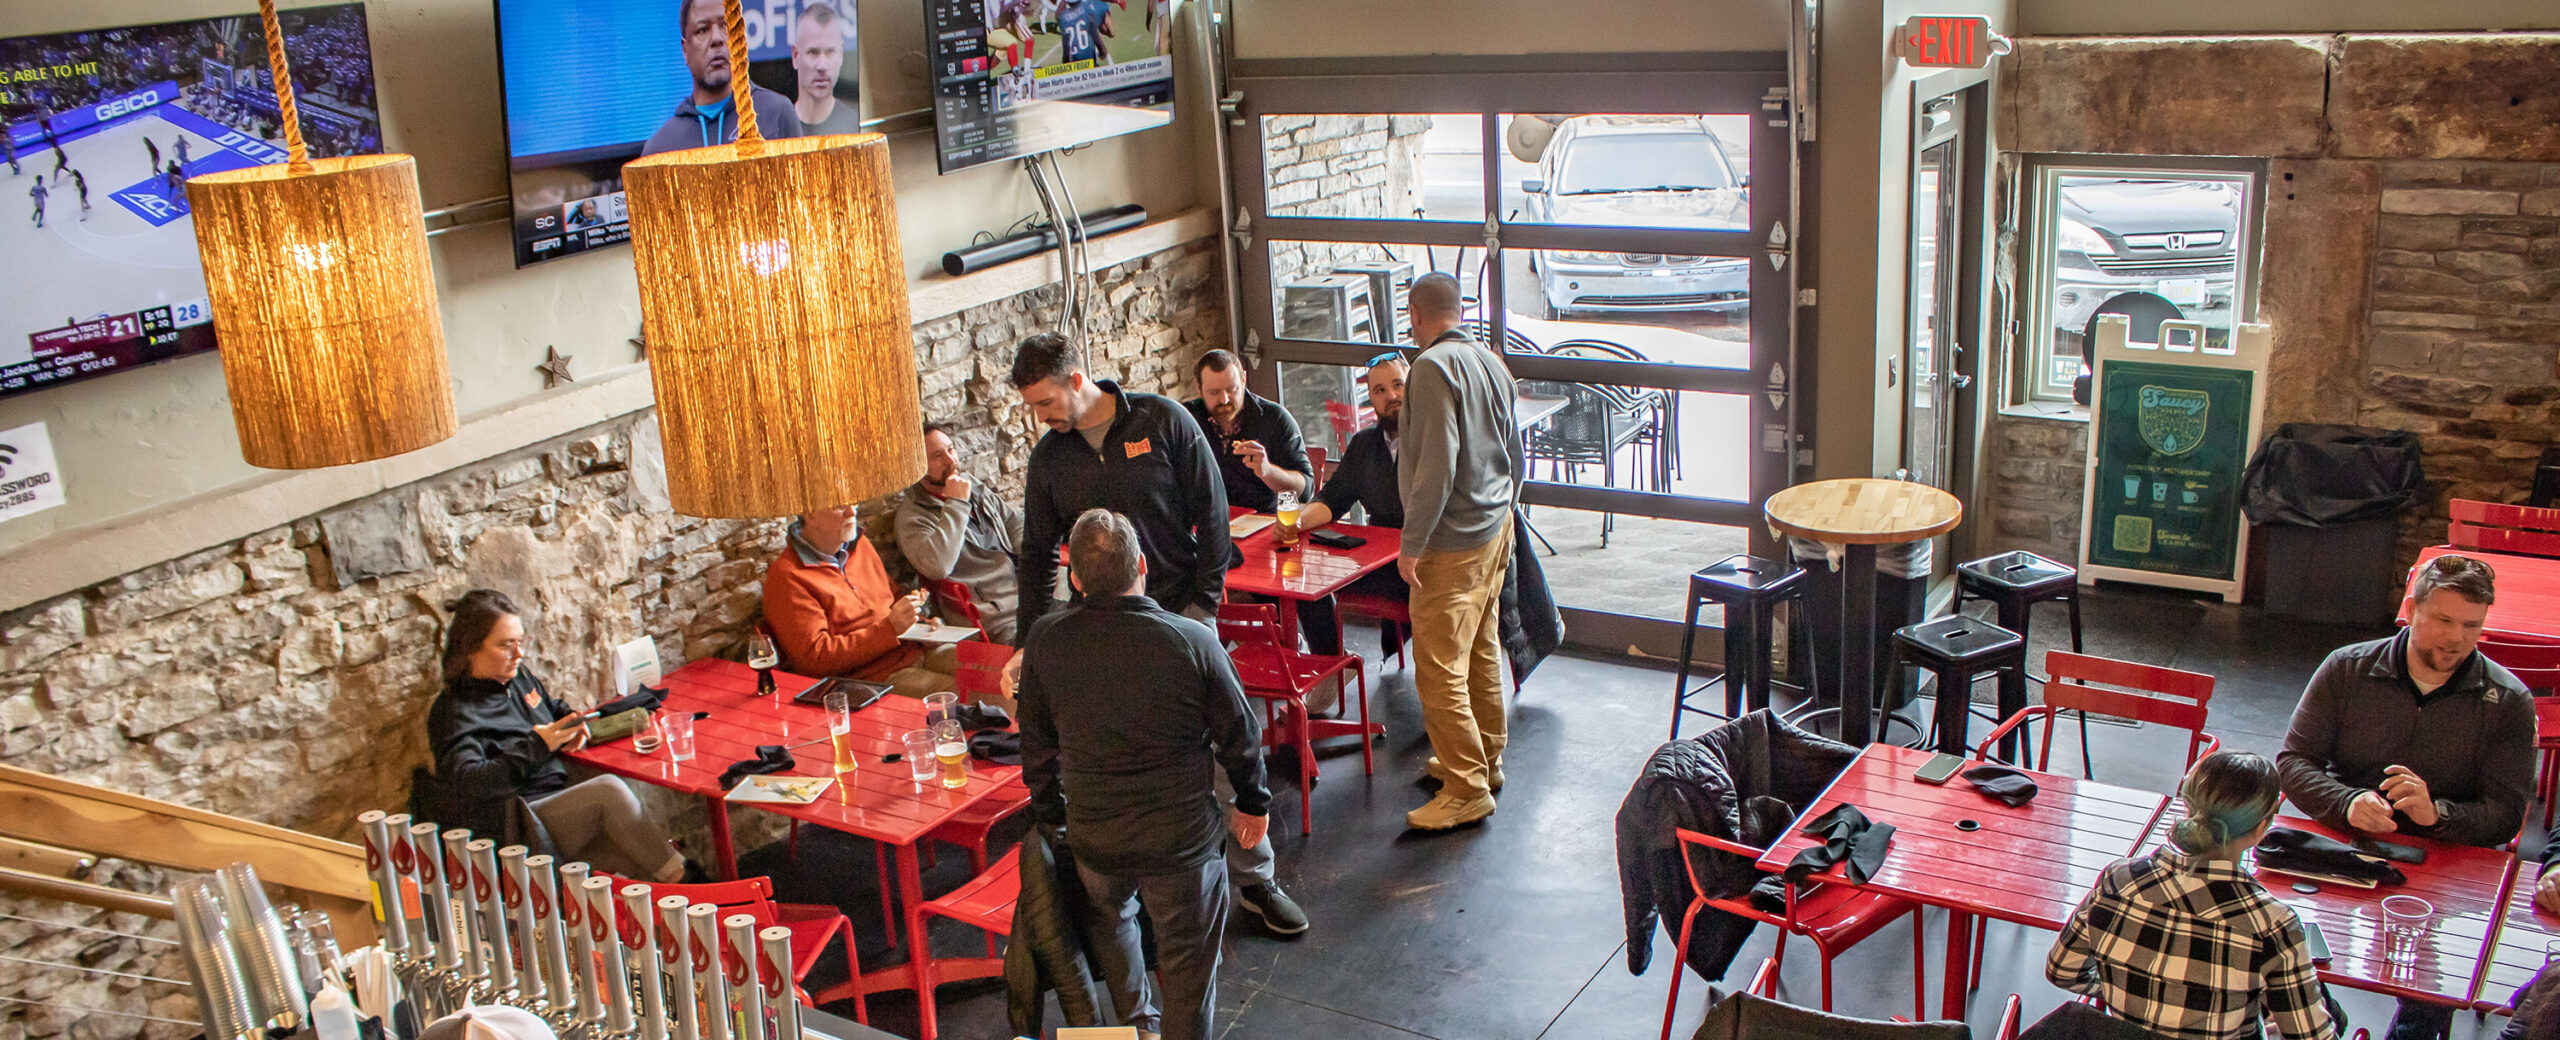 Guests enjoying food and beer in the Saucy Sandusky garage bar